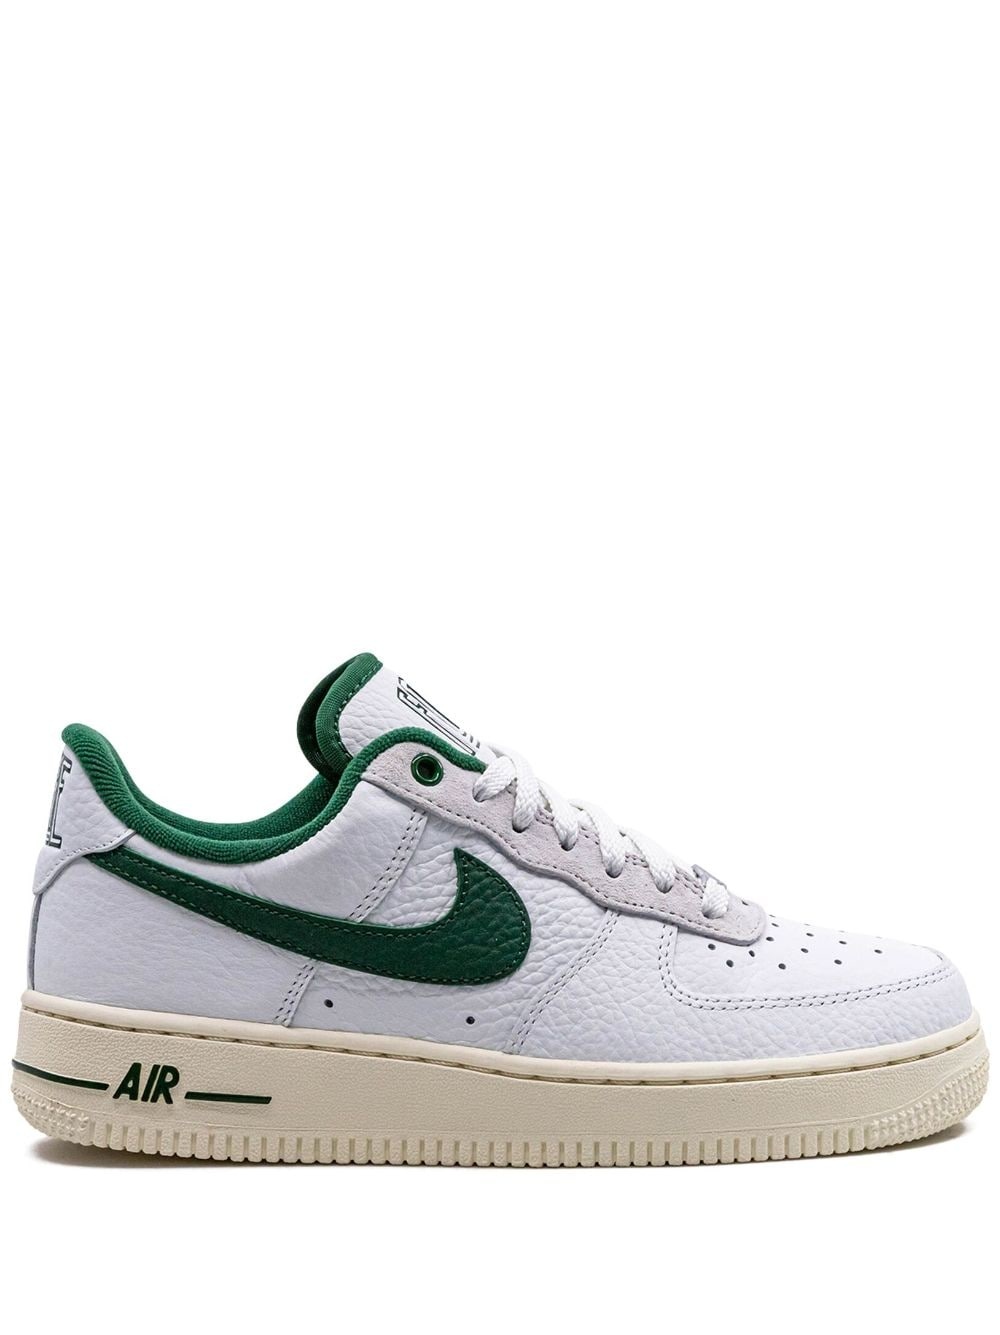 Air Force 1 '07 "Command Force Gorge Green" sneakers - 1